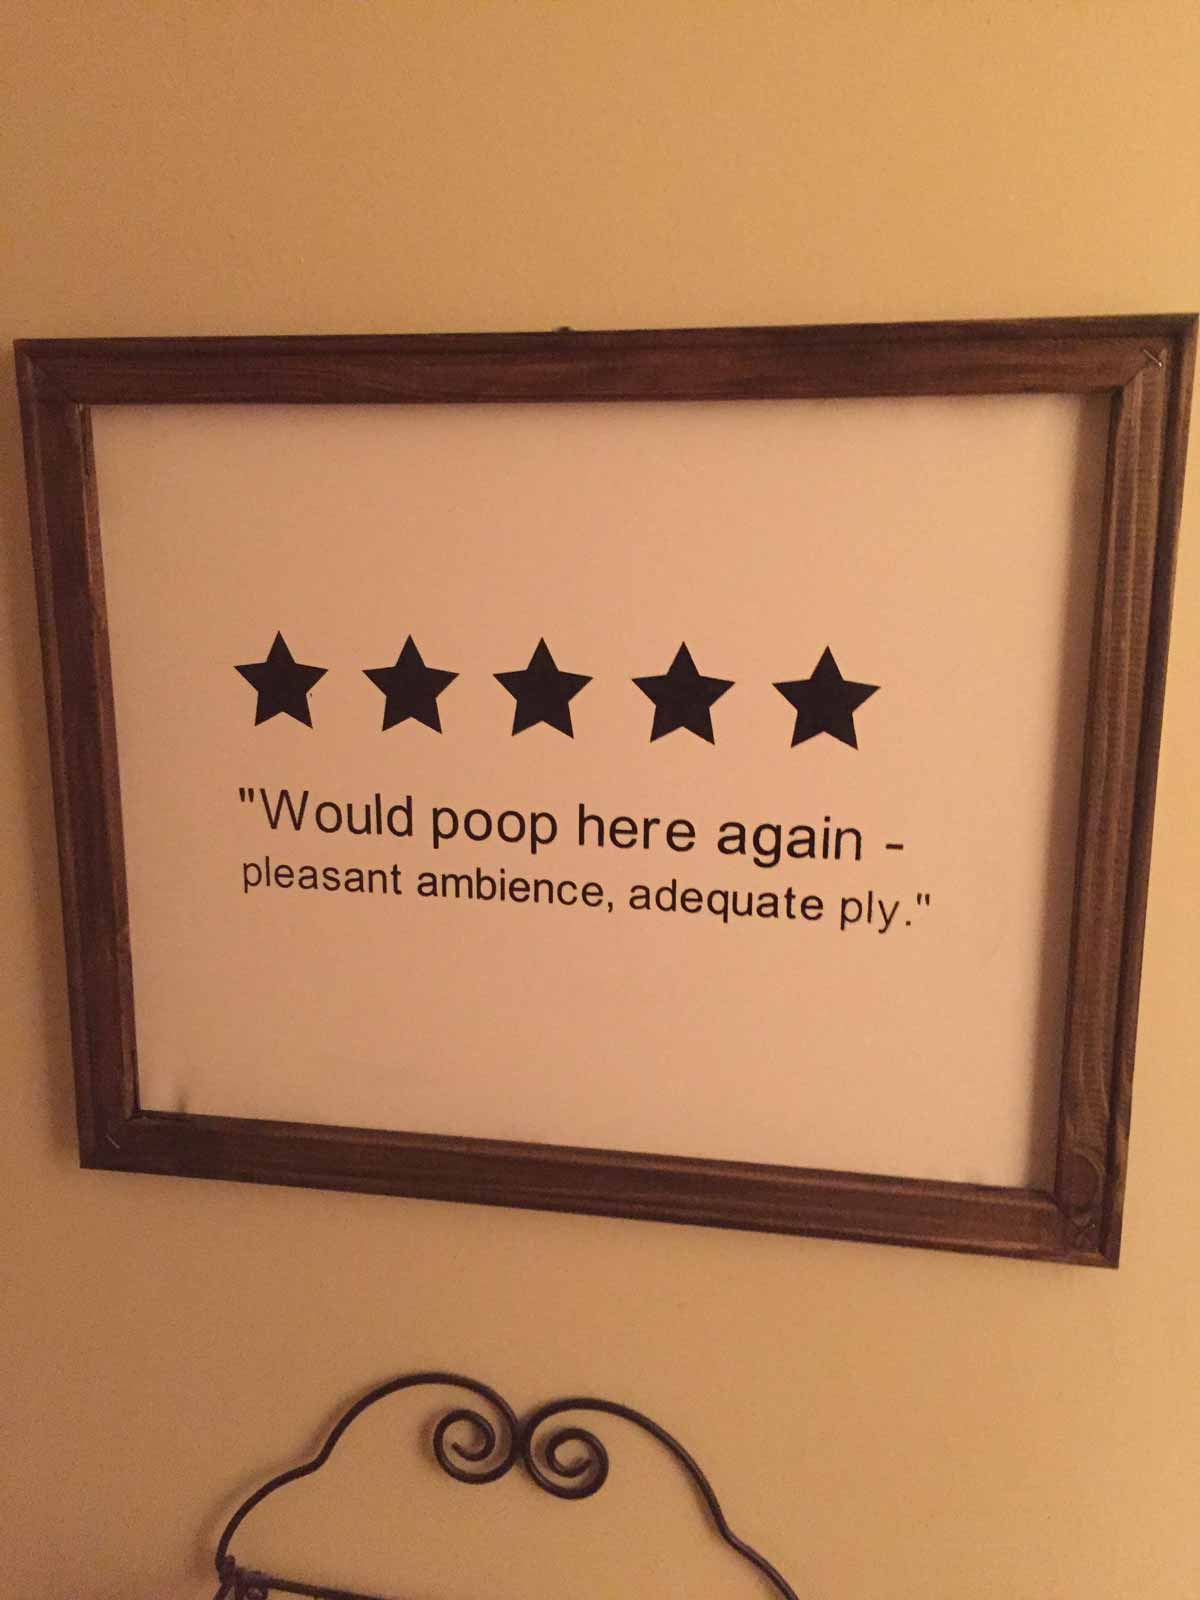 Funny framed bathroom sign that is a review that says 'five stars would poop here again - pleasant ambience, adequate ply'